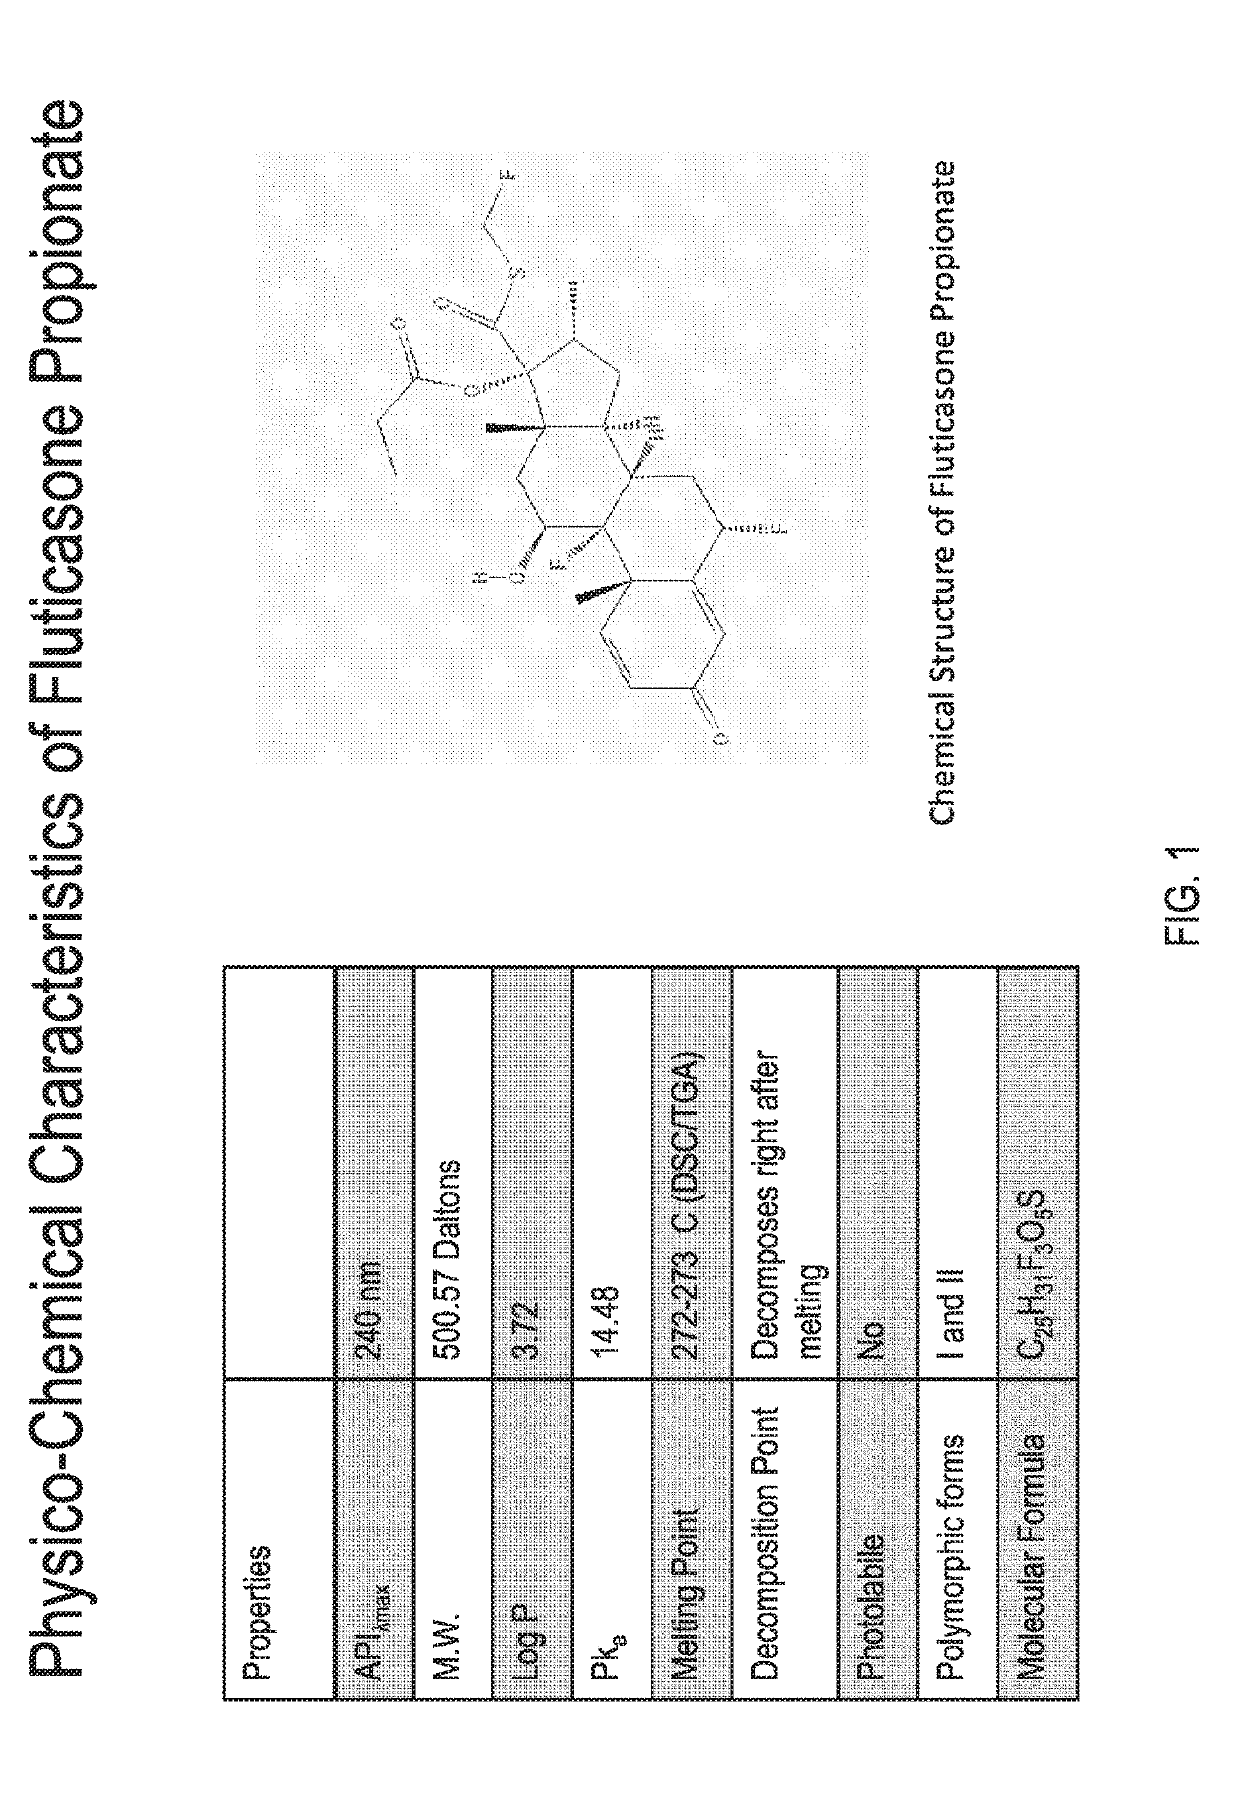 Preparations of hydrophobic therapeutic agents, methods of manufacture and use thereof